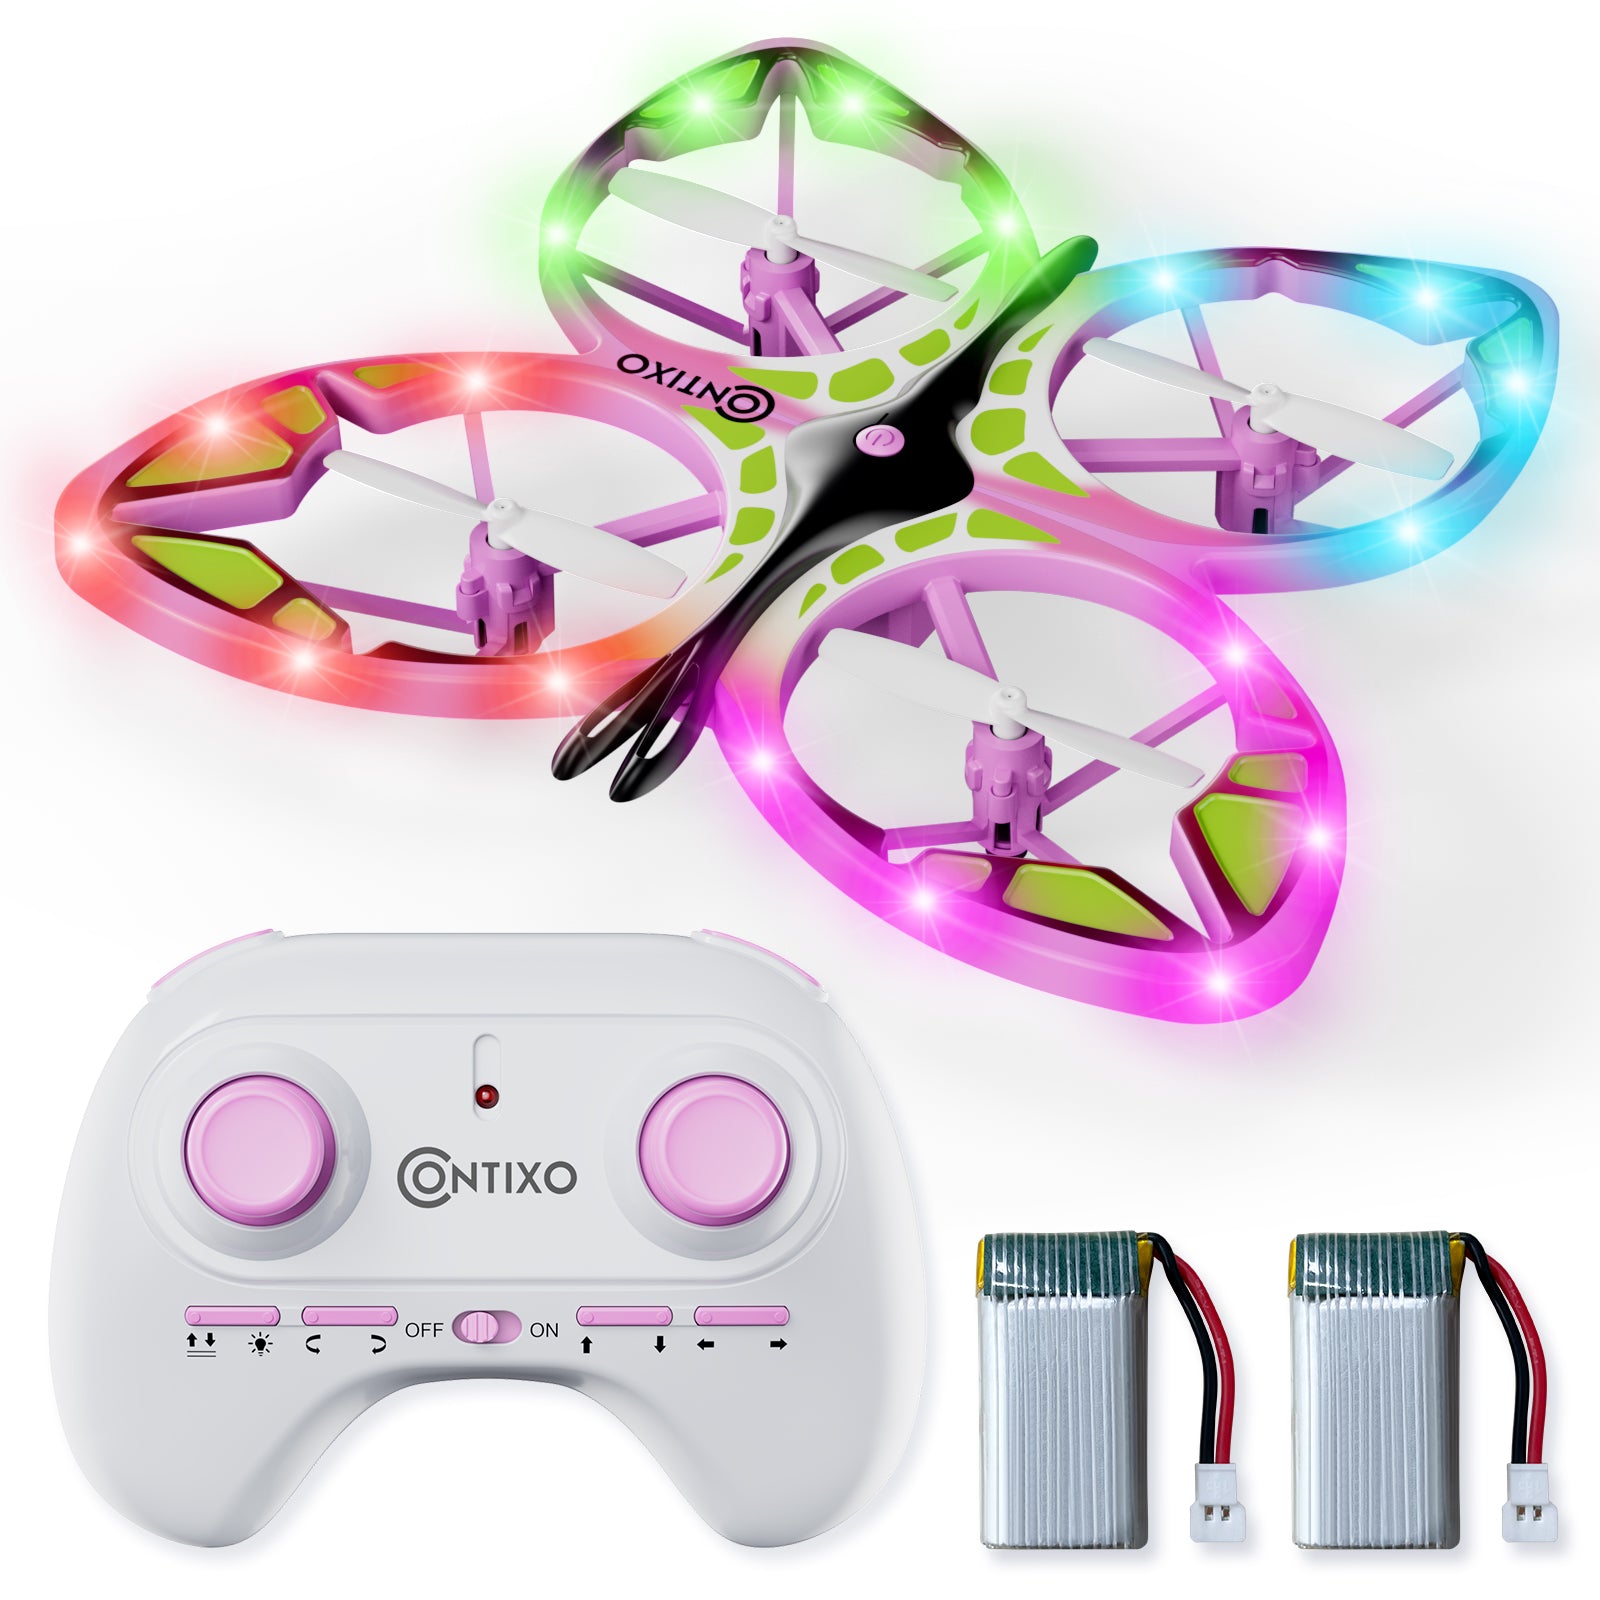 Contixo TD2 Butterfly Drone with LED Light Effects